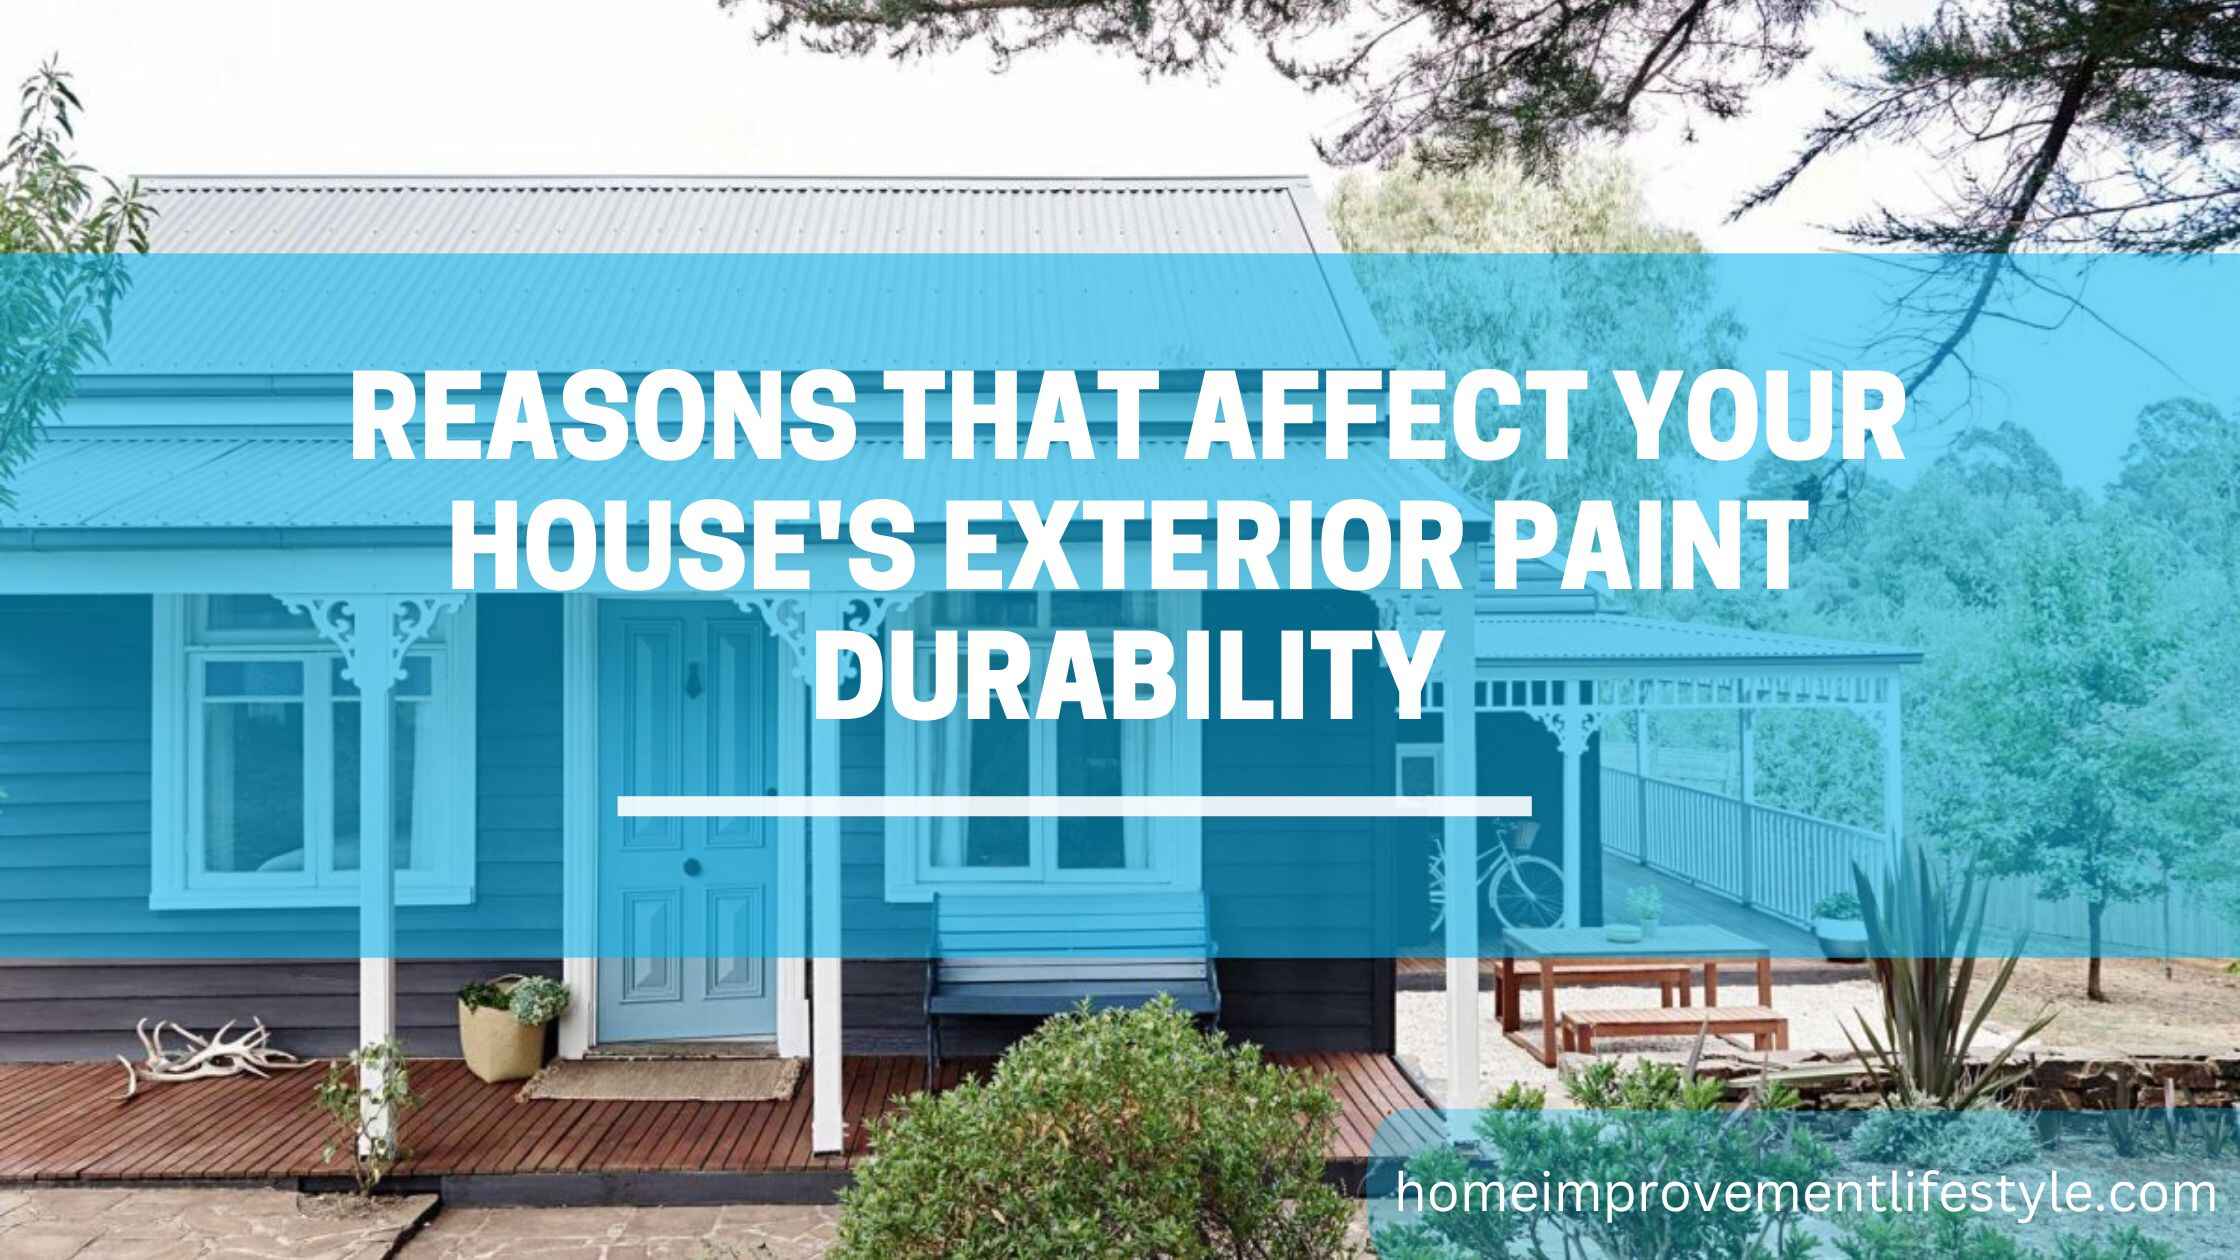 Reasons That Affect Your House's Exterior Paint Durability